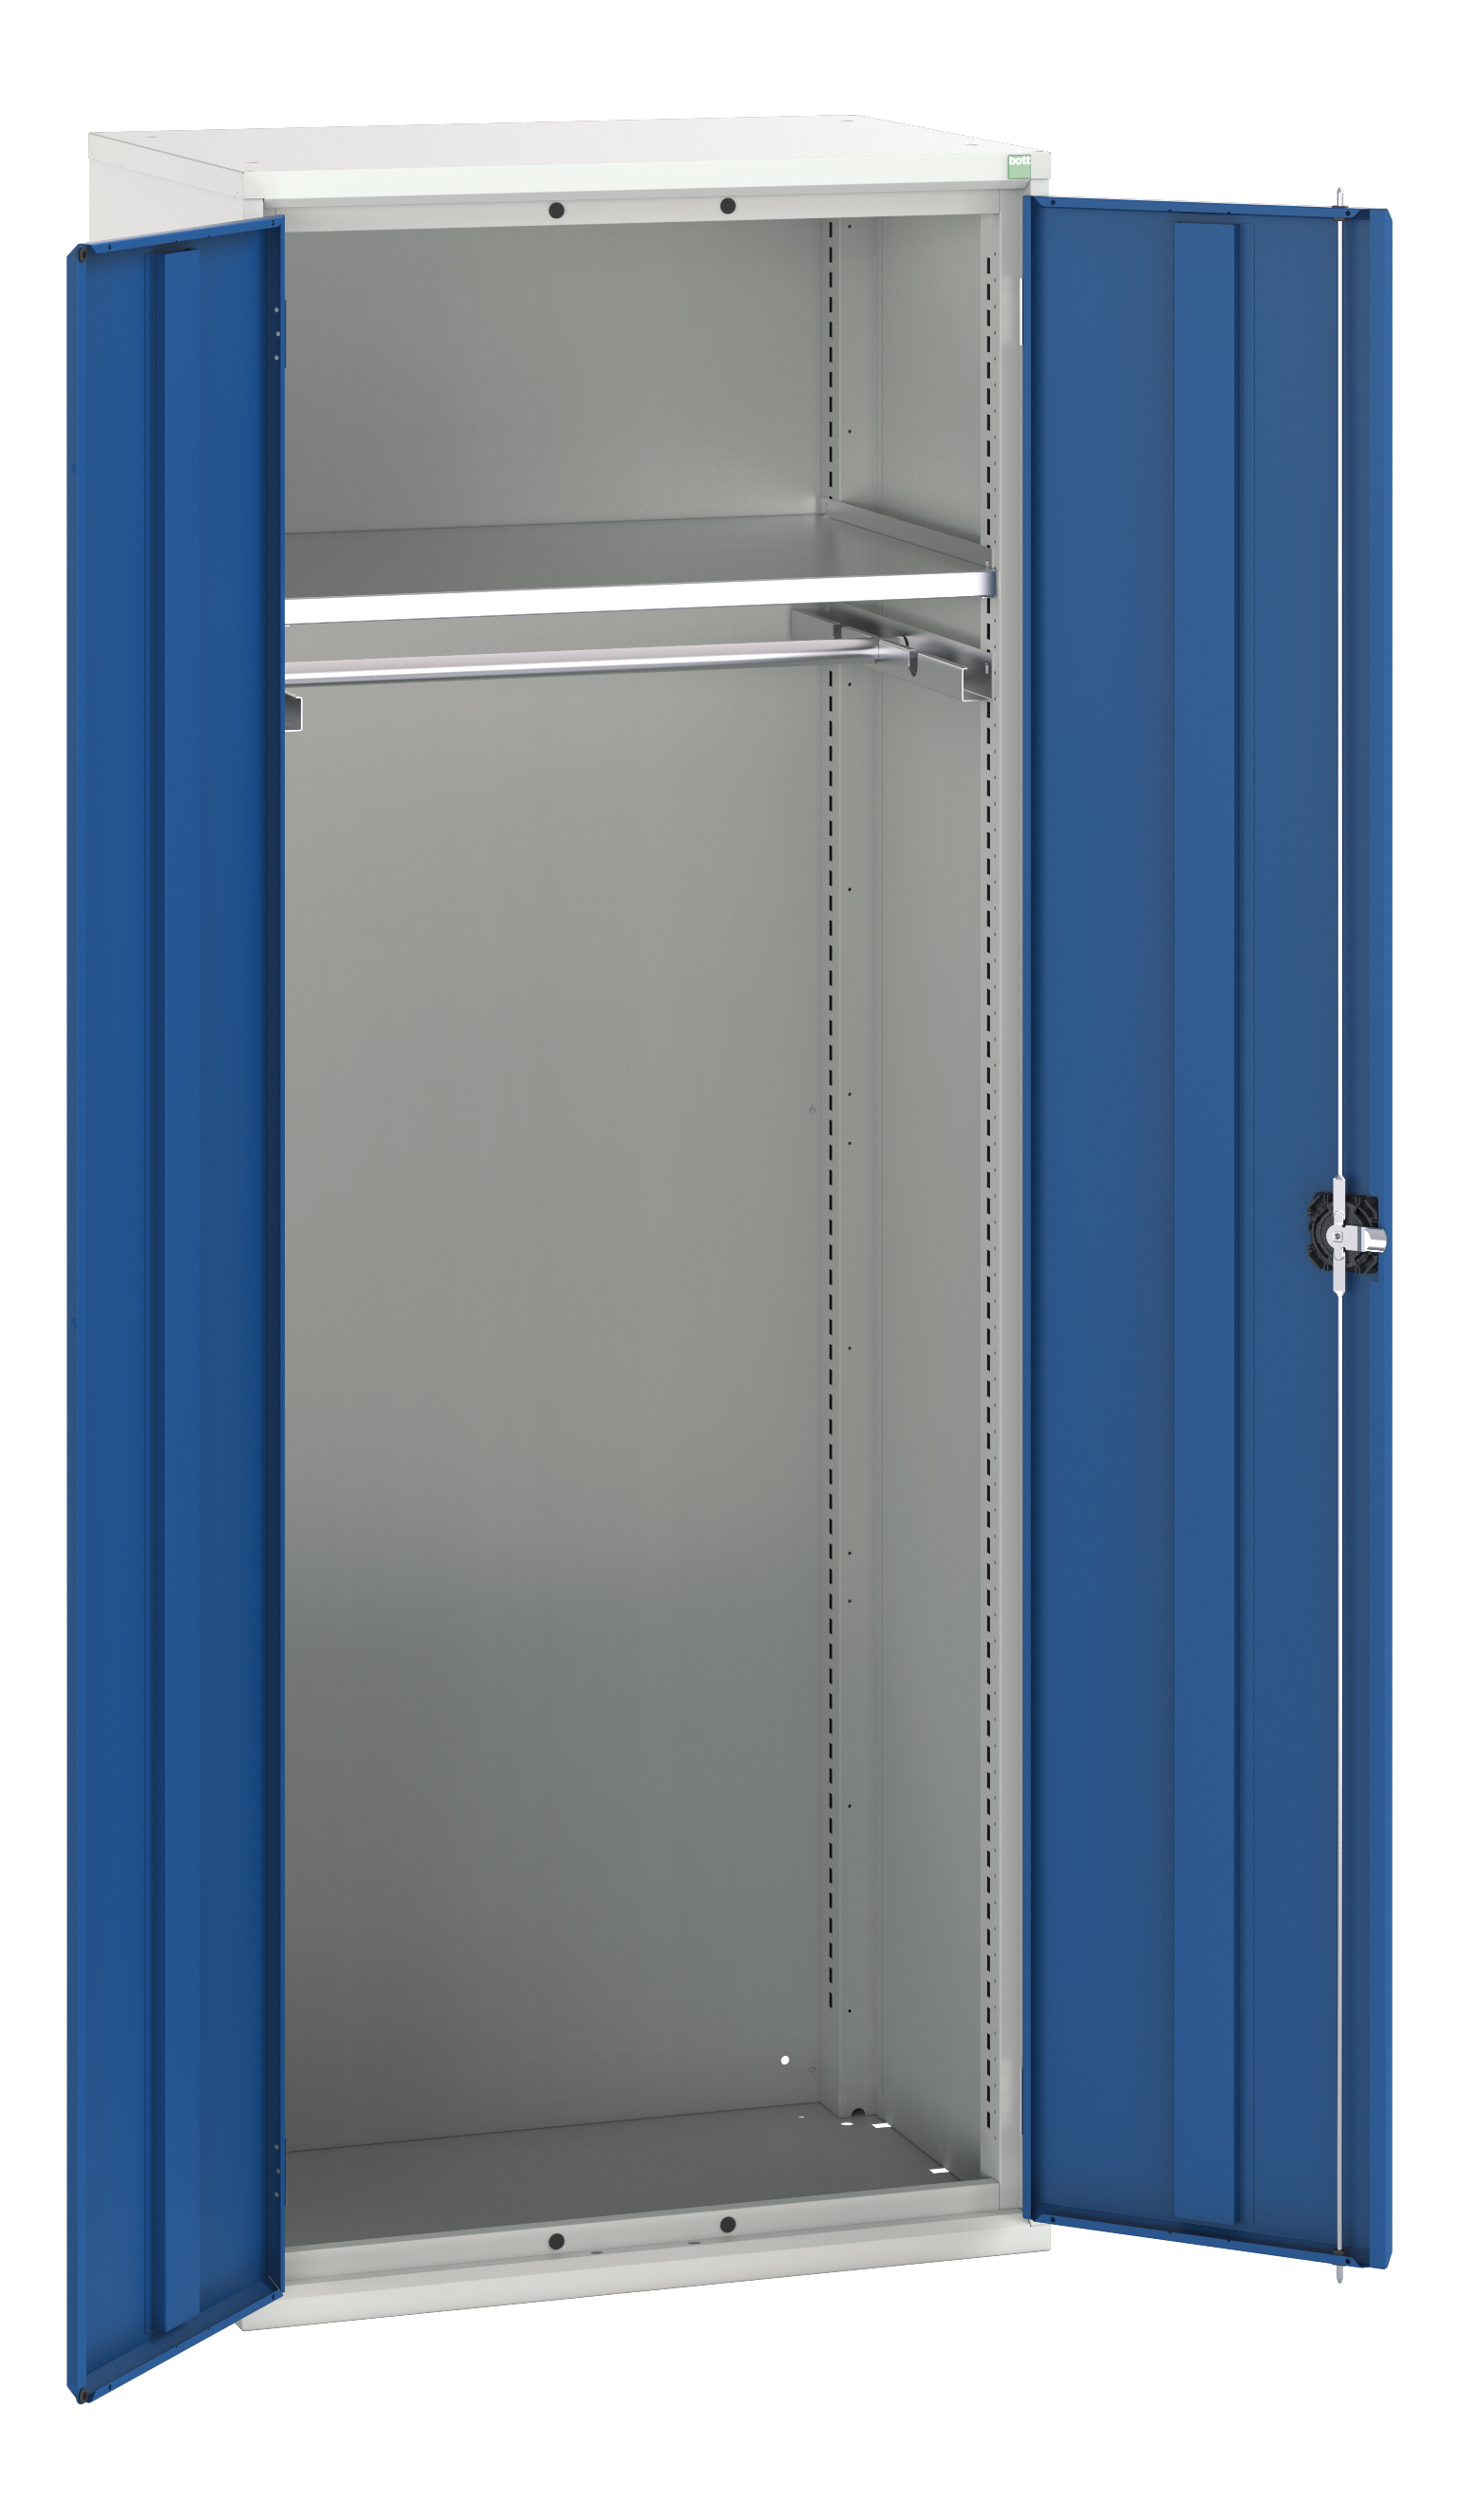 Bott Verso Ppe / Janitorial Kitted Cupboard - 16926459.11